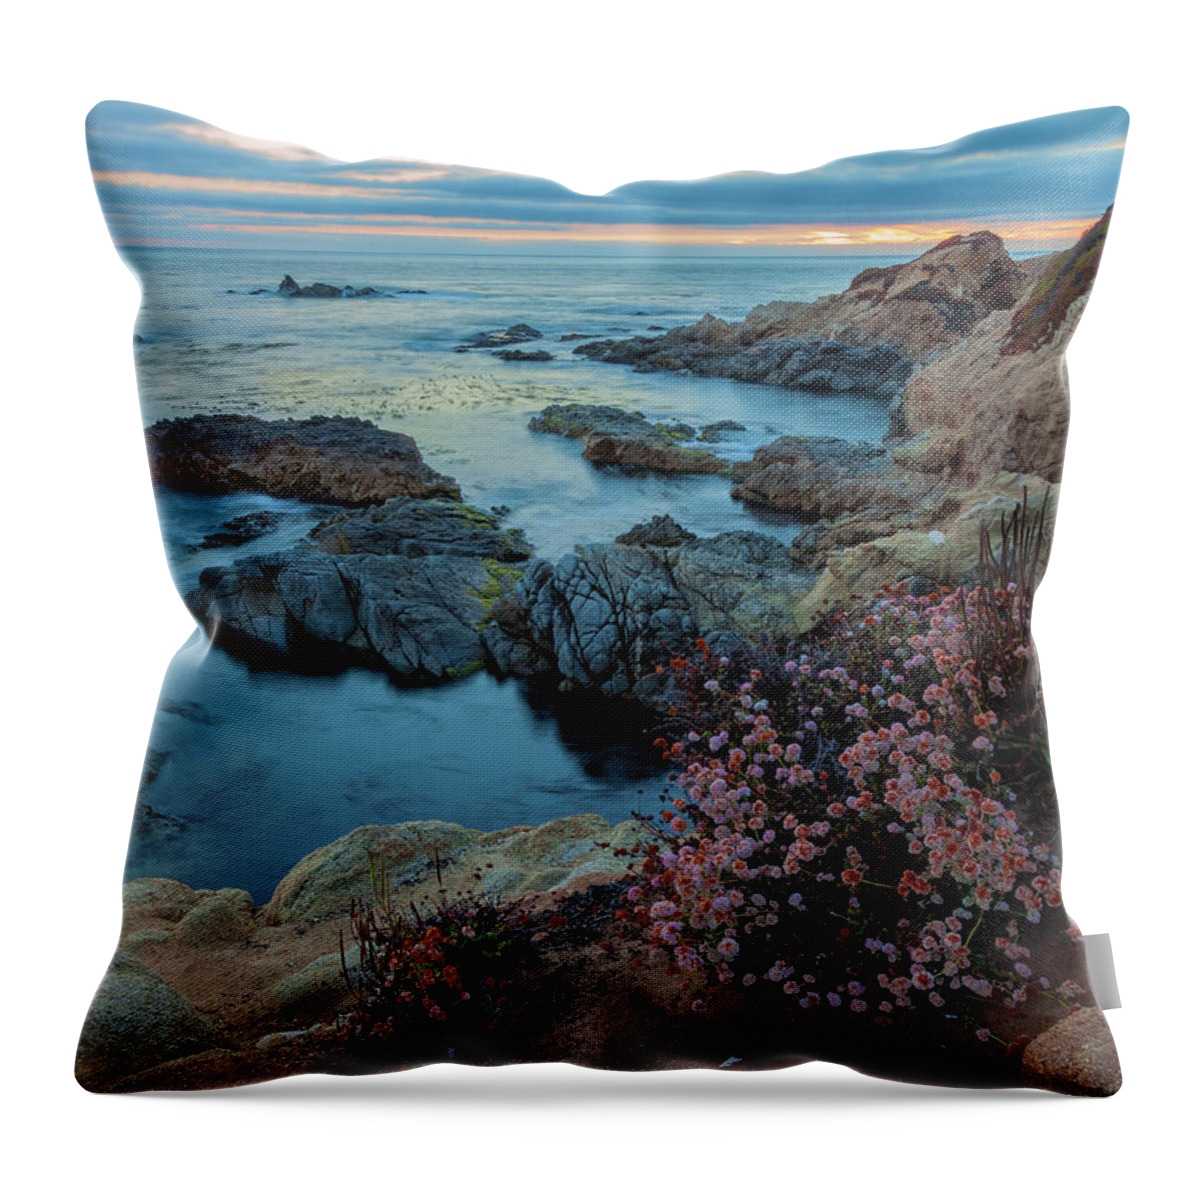 Wildflowers Throw Pillow featuring the photograph A Late Summer Evening by Jonathan Nguyen